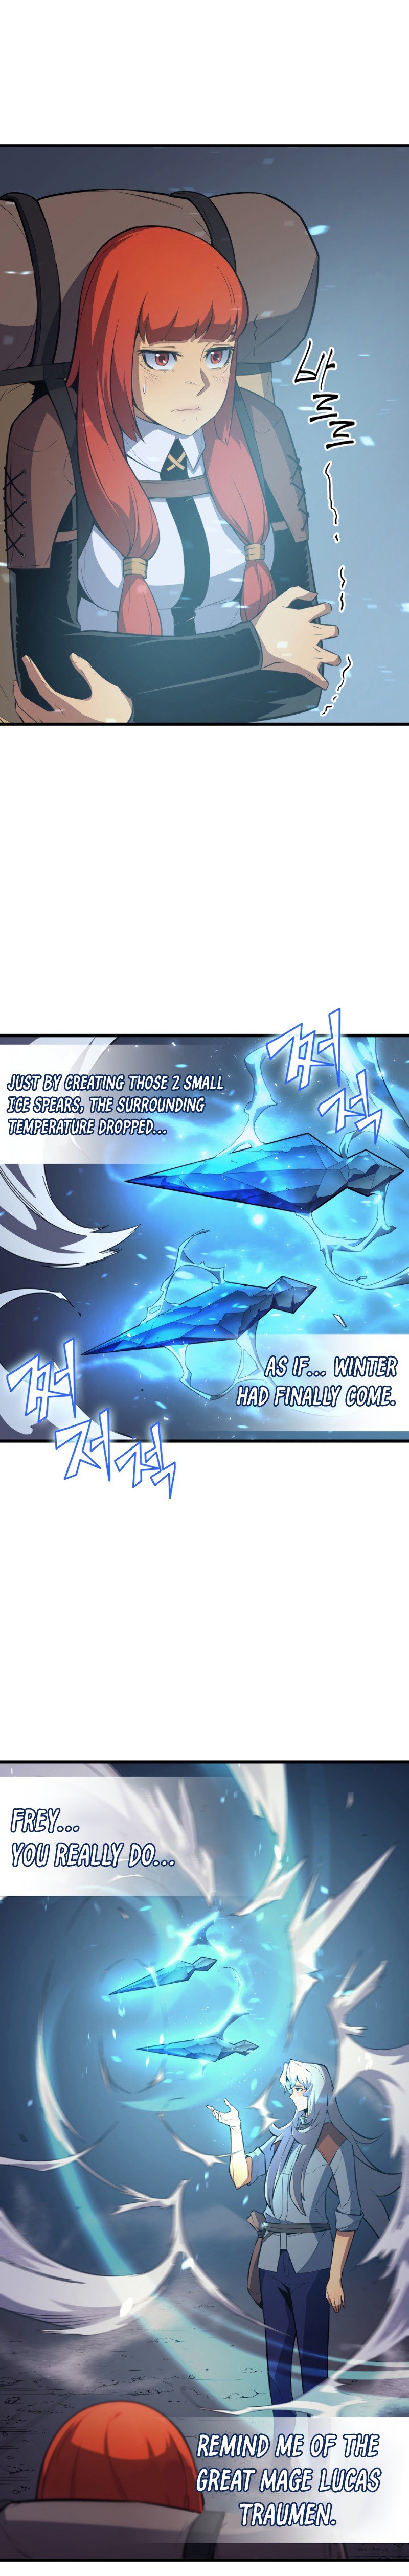 the-great-mage-that-returned-after-4000-years-chap-31-1